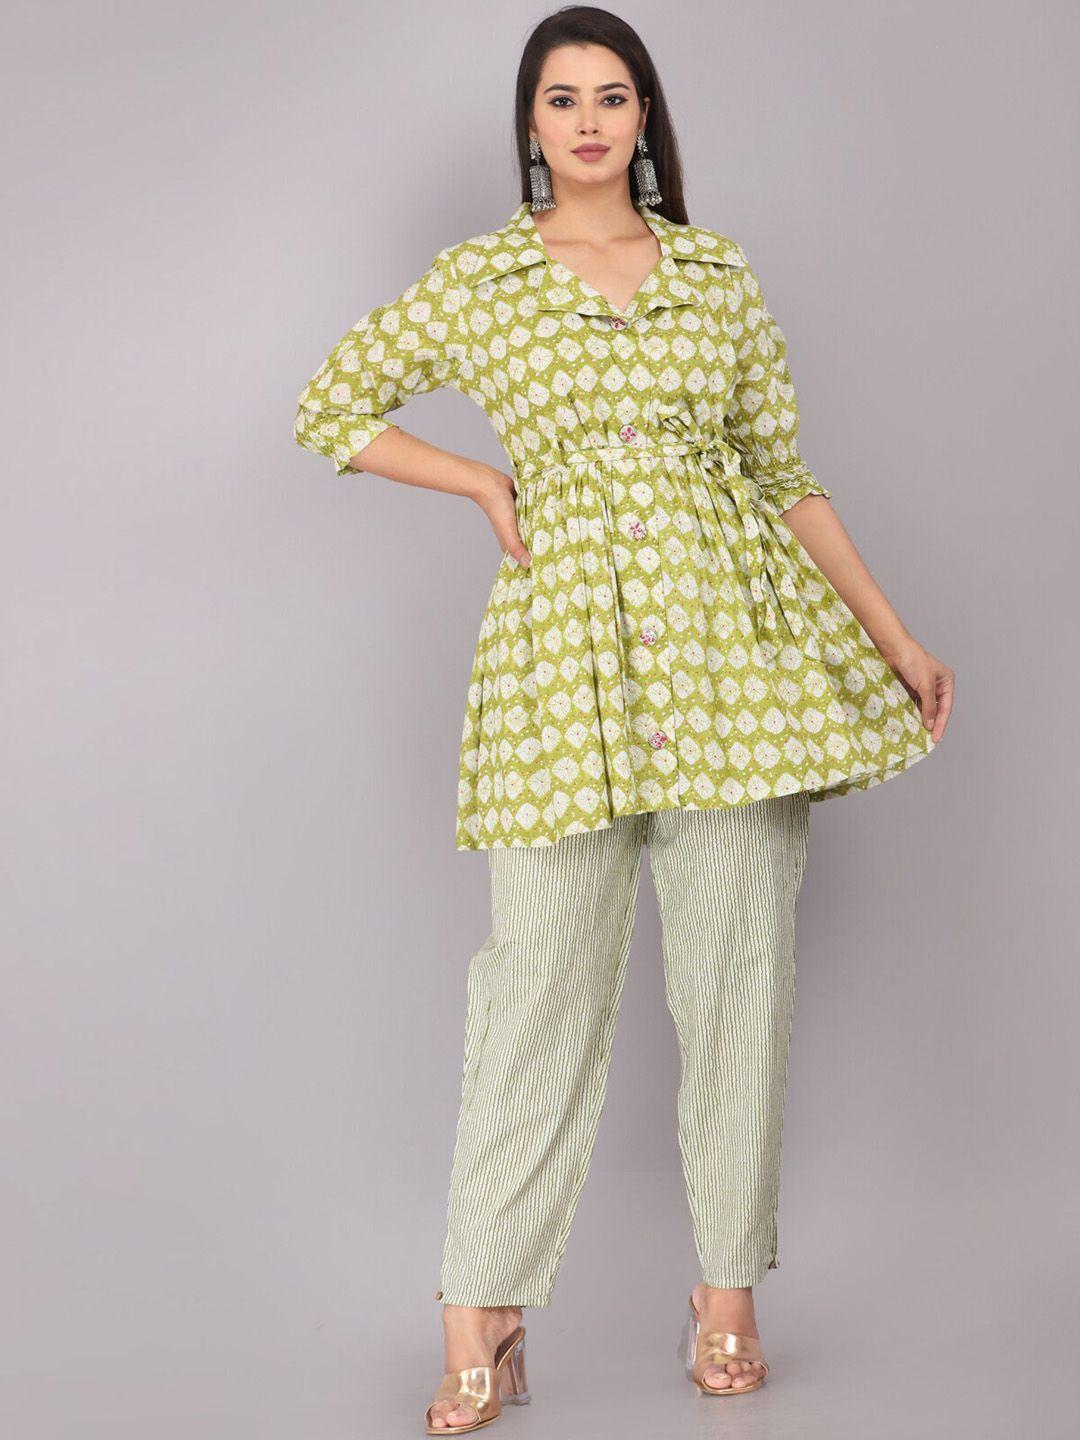 jc4u floral printed shirt collar a-line kurti with striped trousers